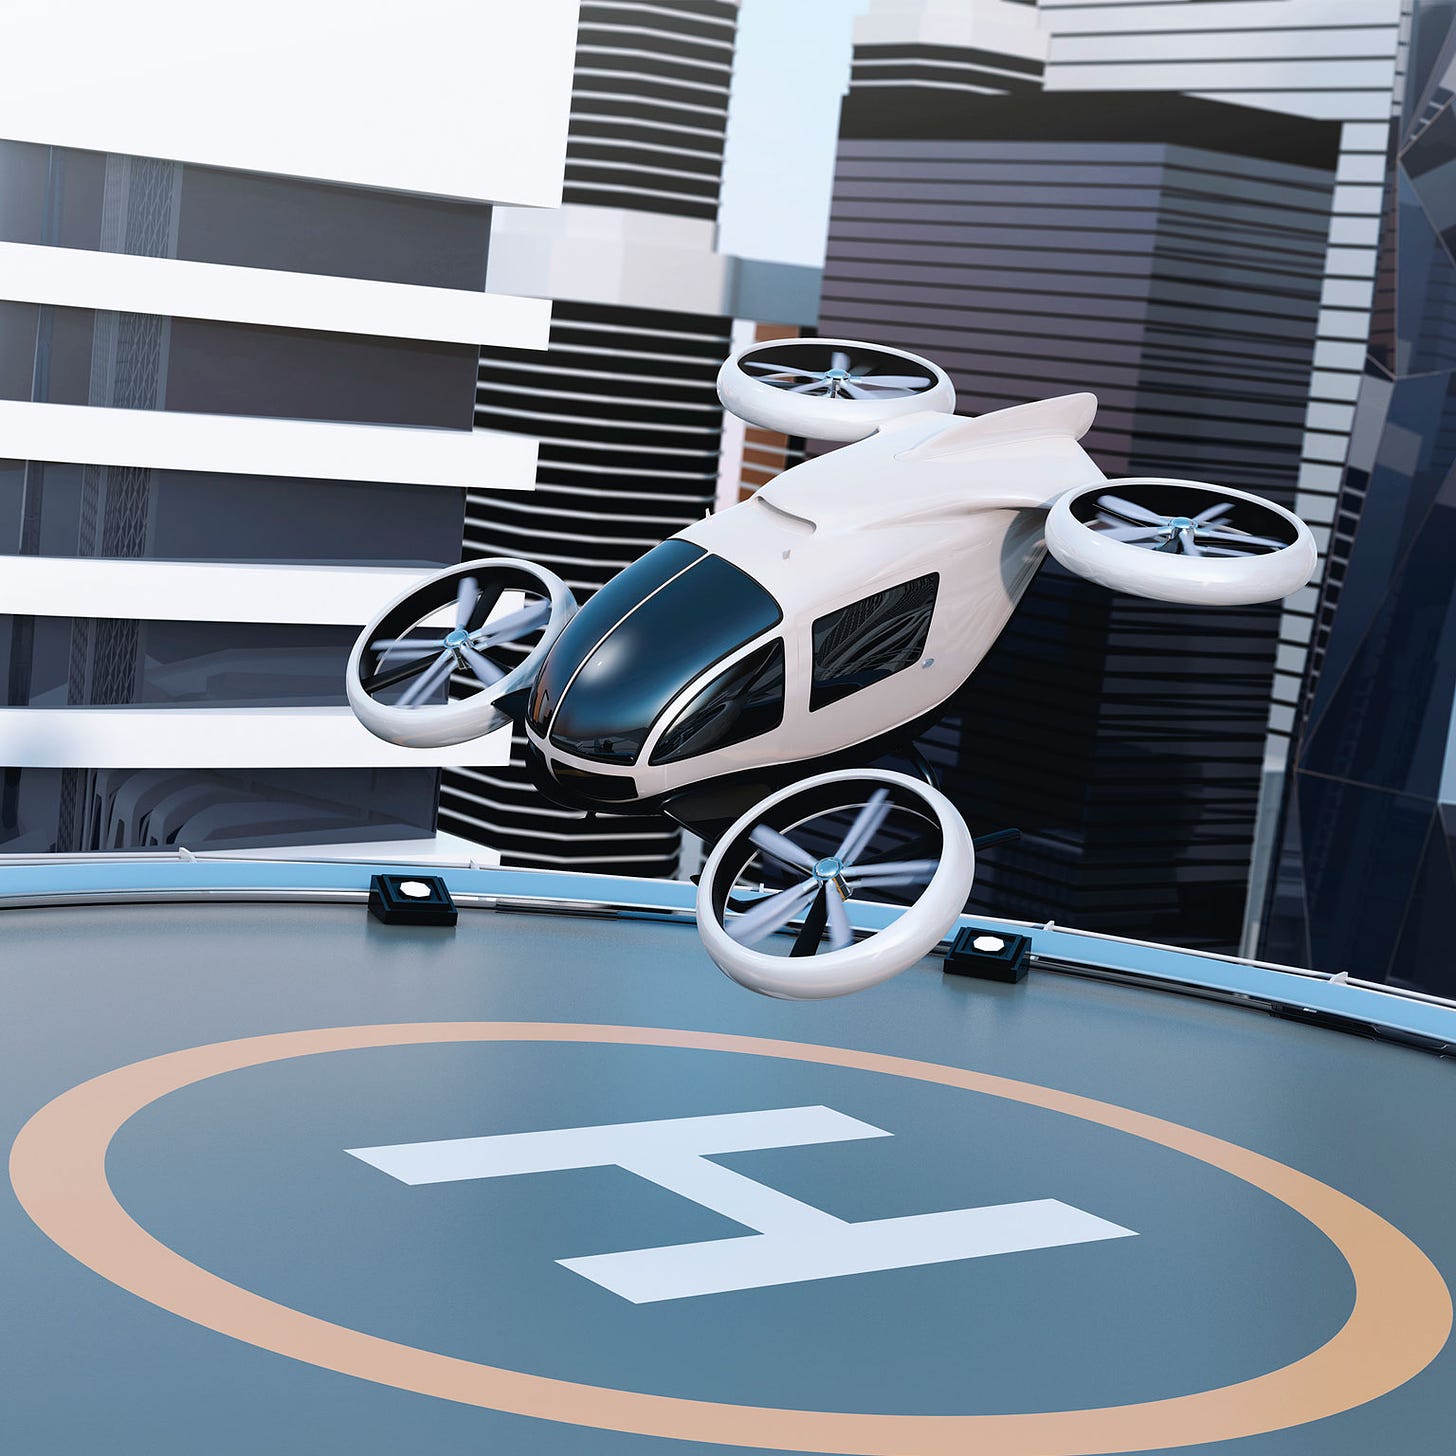 How do consumers view advanced air mobility? | McKinsey